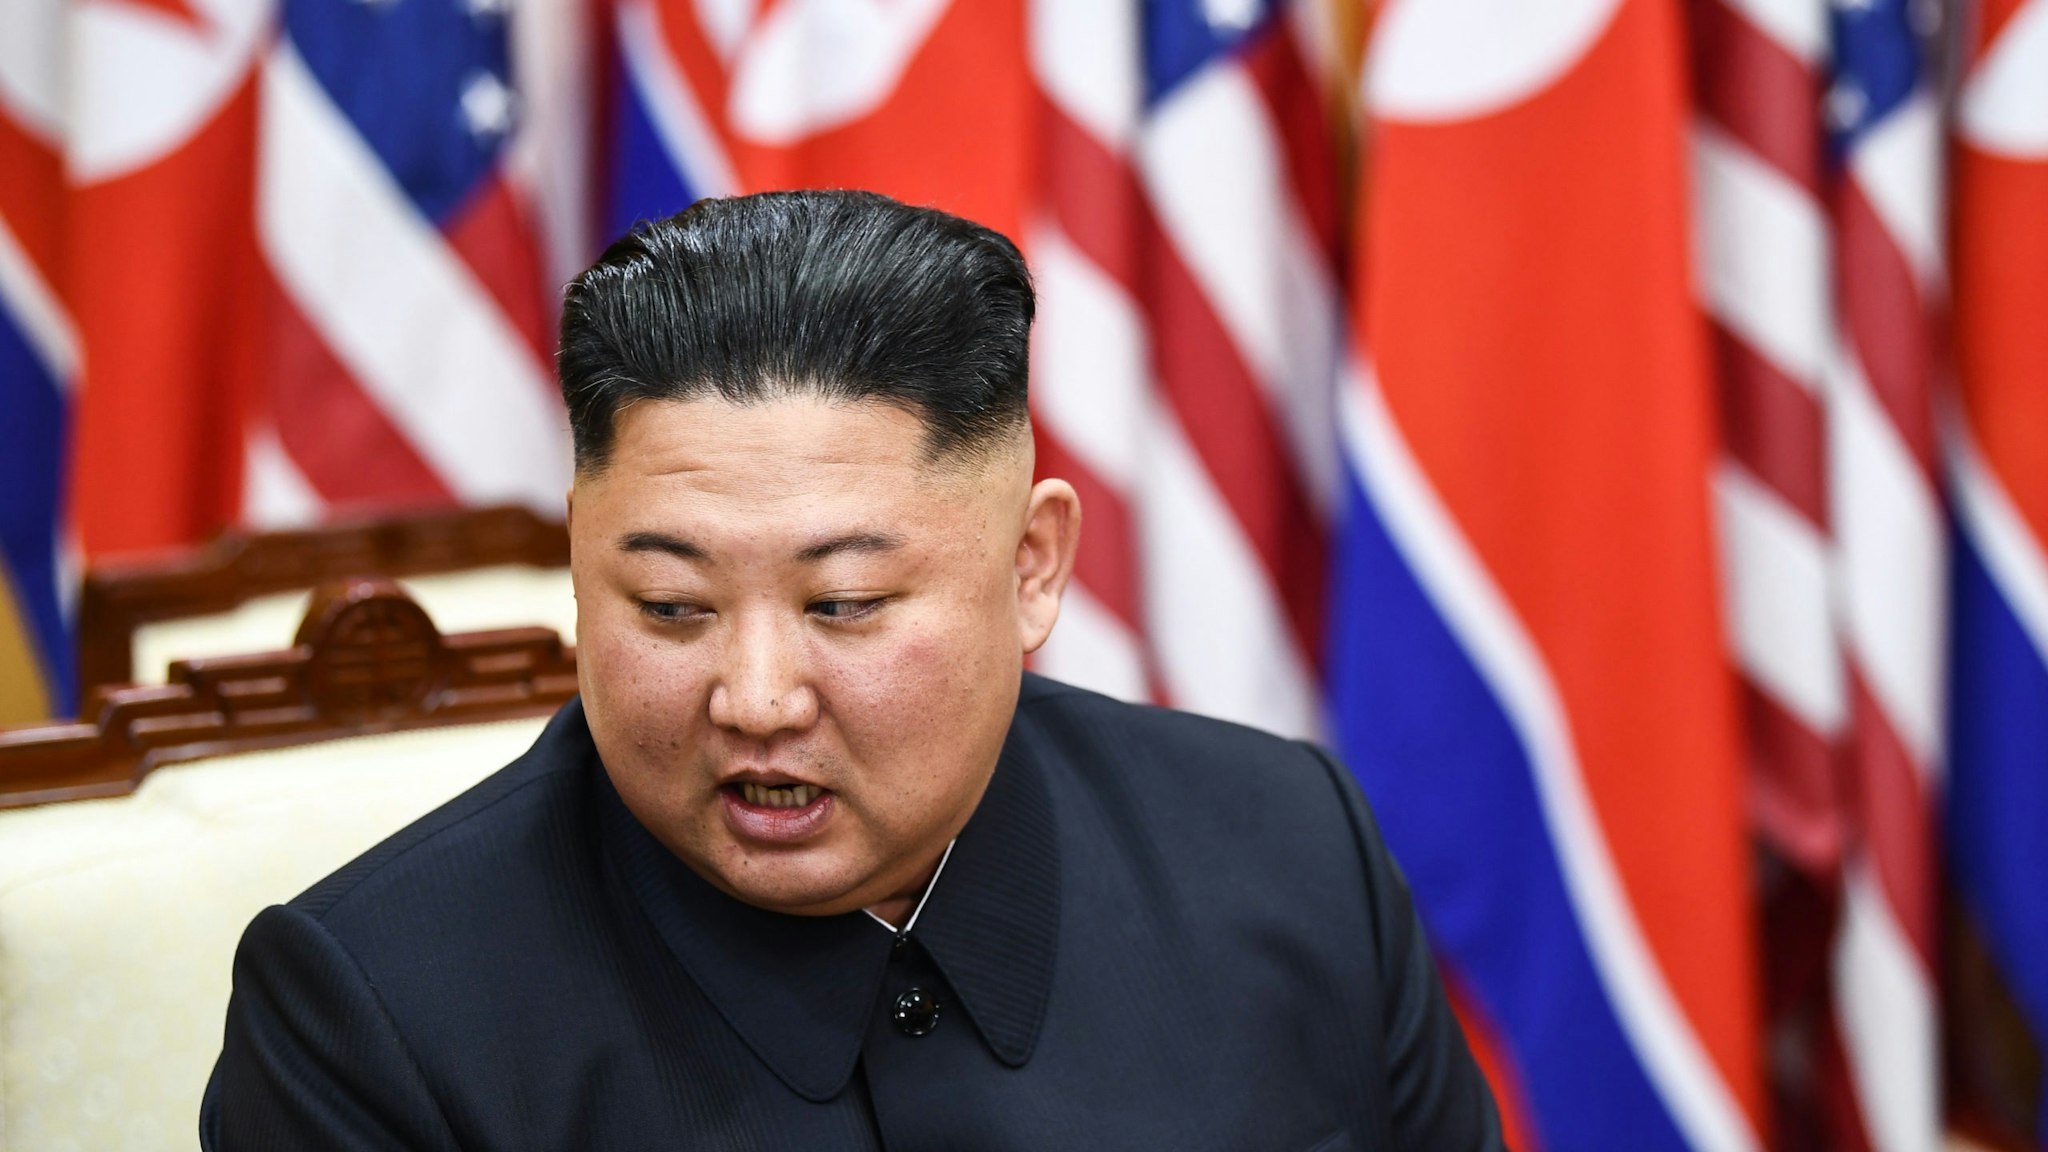 North Korea's leader Kim Jong Un attends a meeting with US President Donald Trump on the south side of the Military Demarcation Line that divides North and South Korea, in the Joint Security Area (JSA) of Panmunjom in the Demilitarized zone (DMZ) on June 30, 2019.